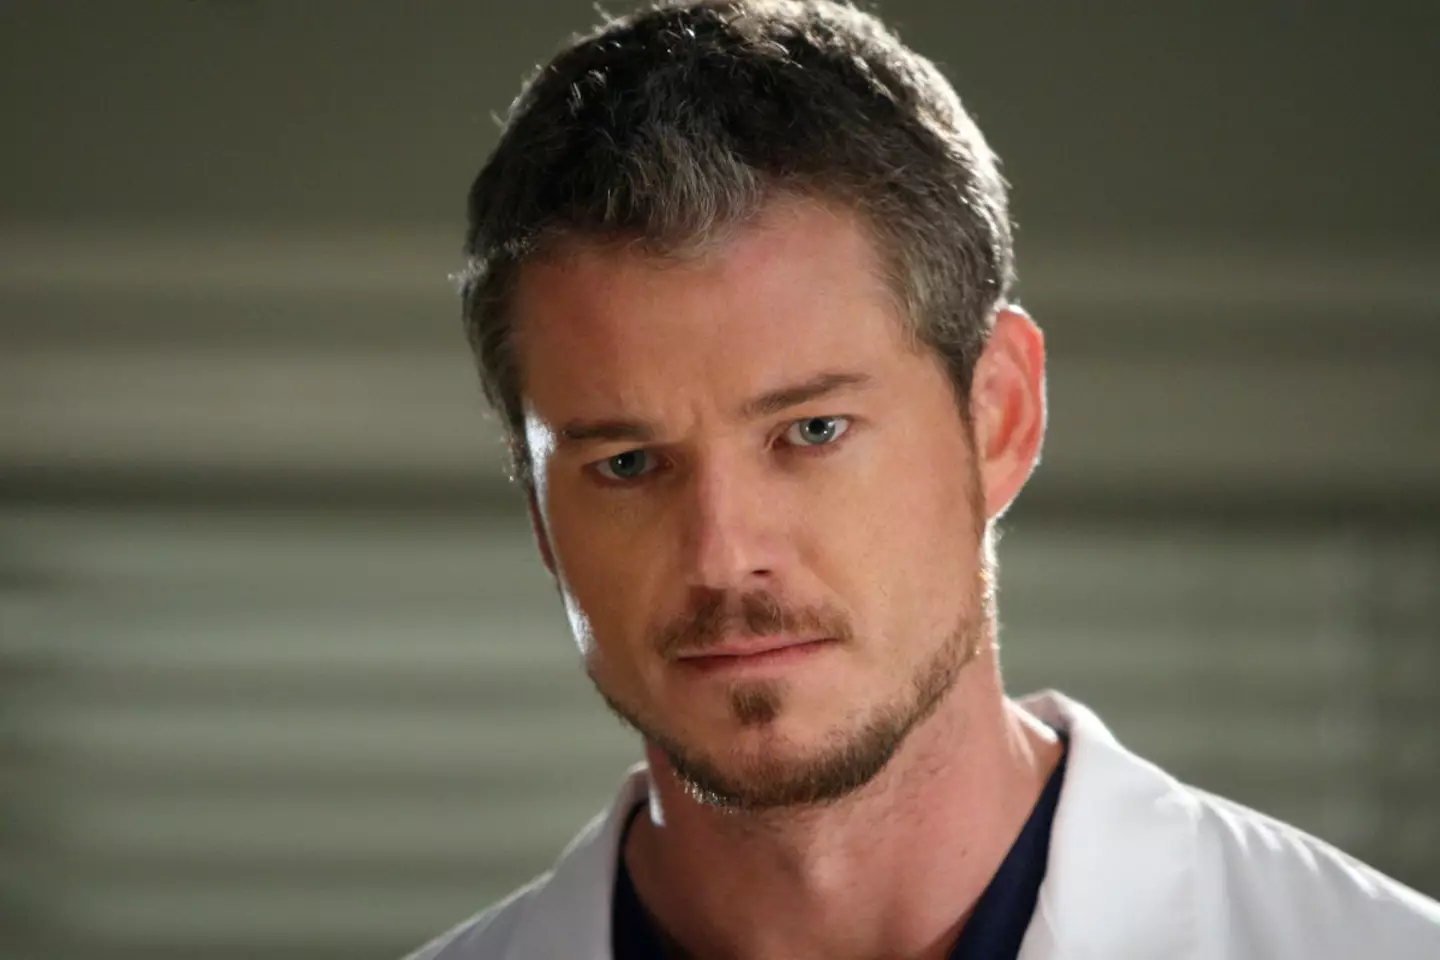 He played Dr. Mark Sloan in the hit series. (ABC)